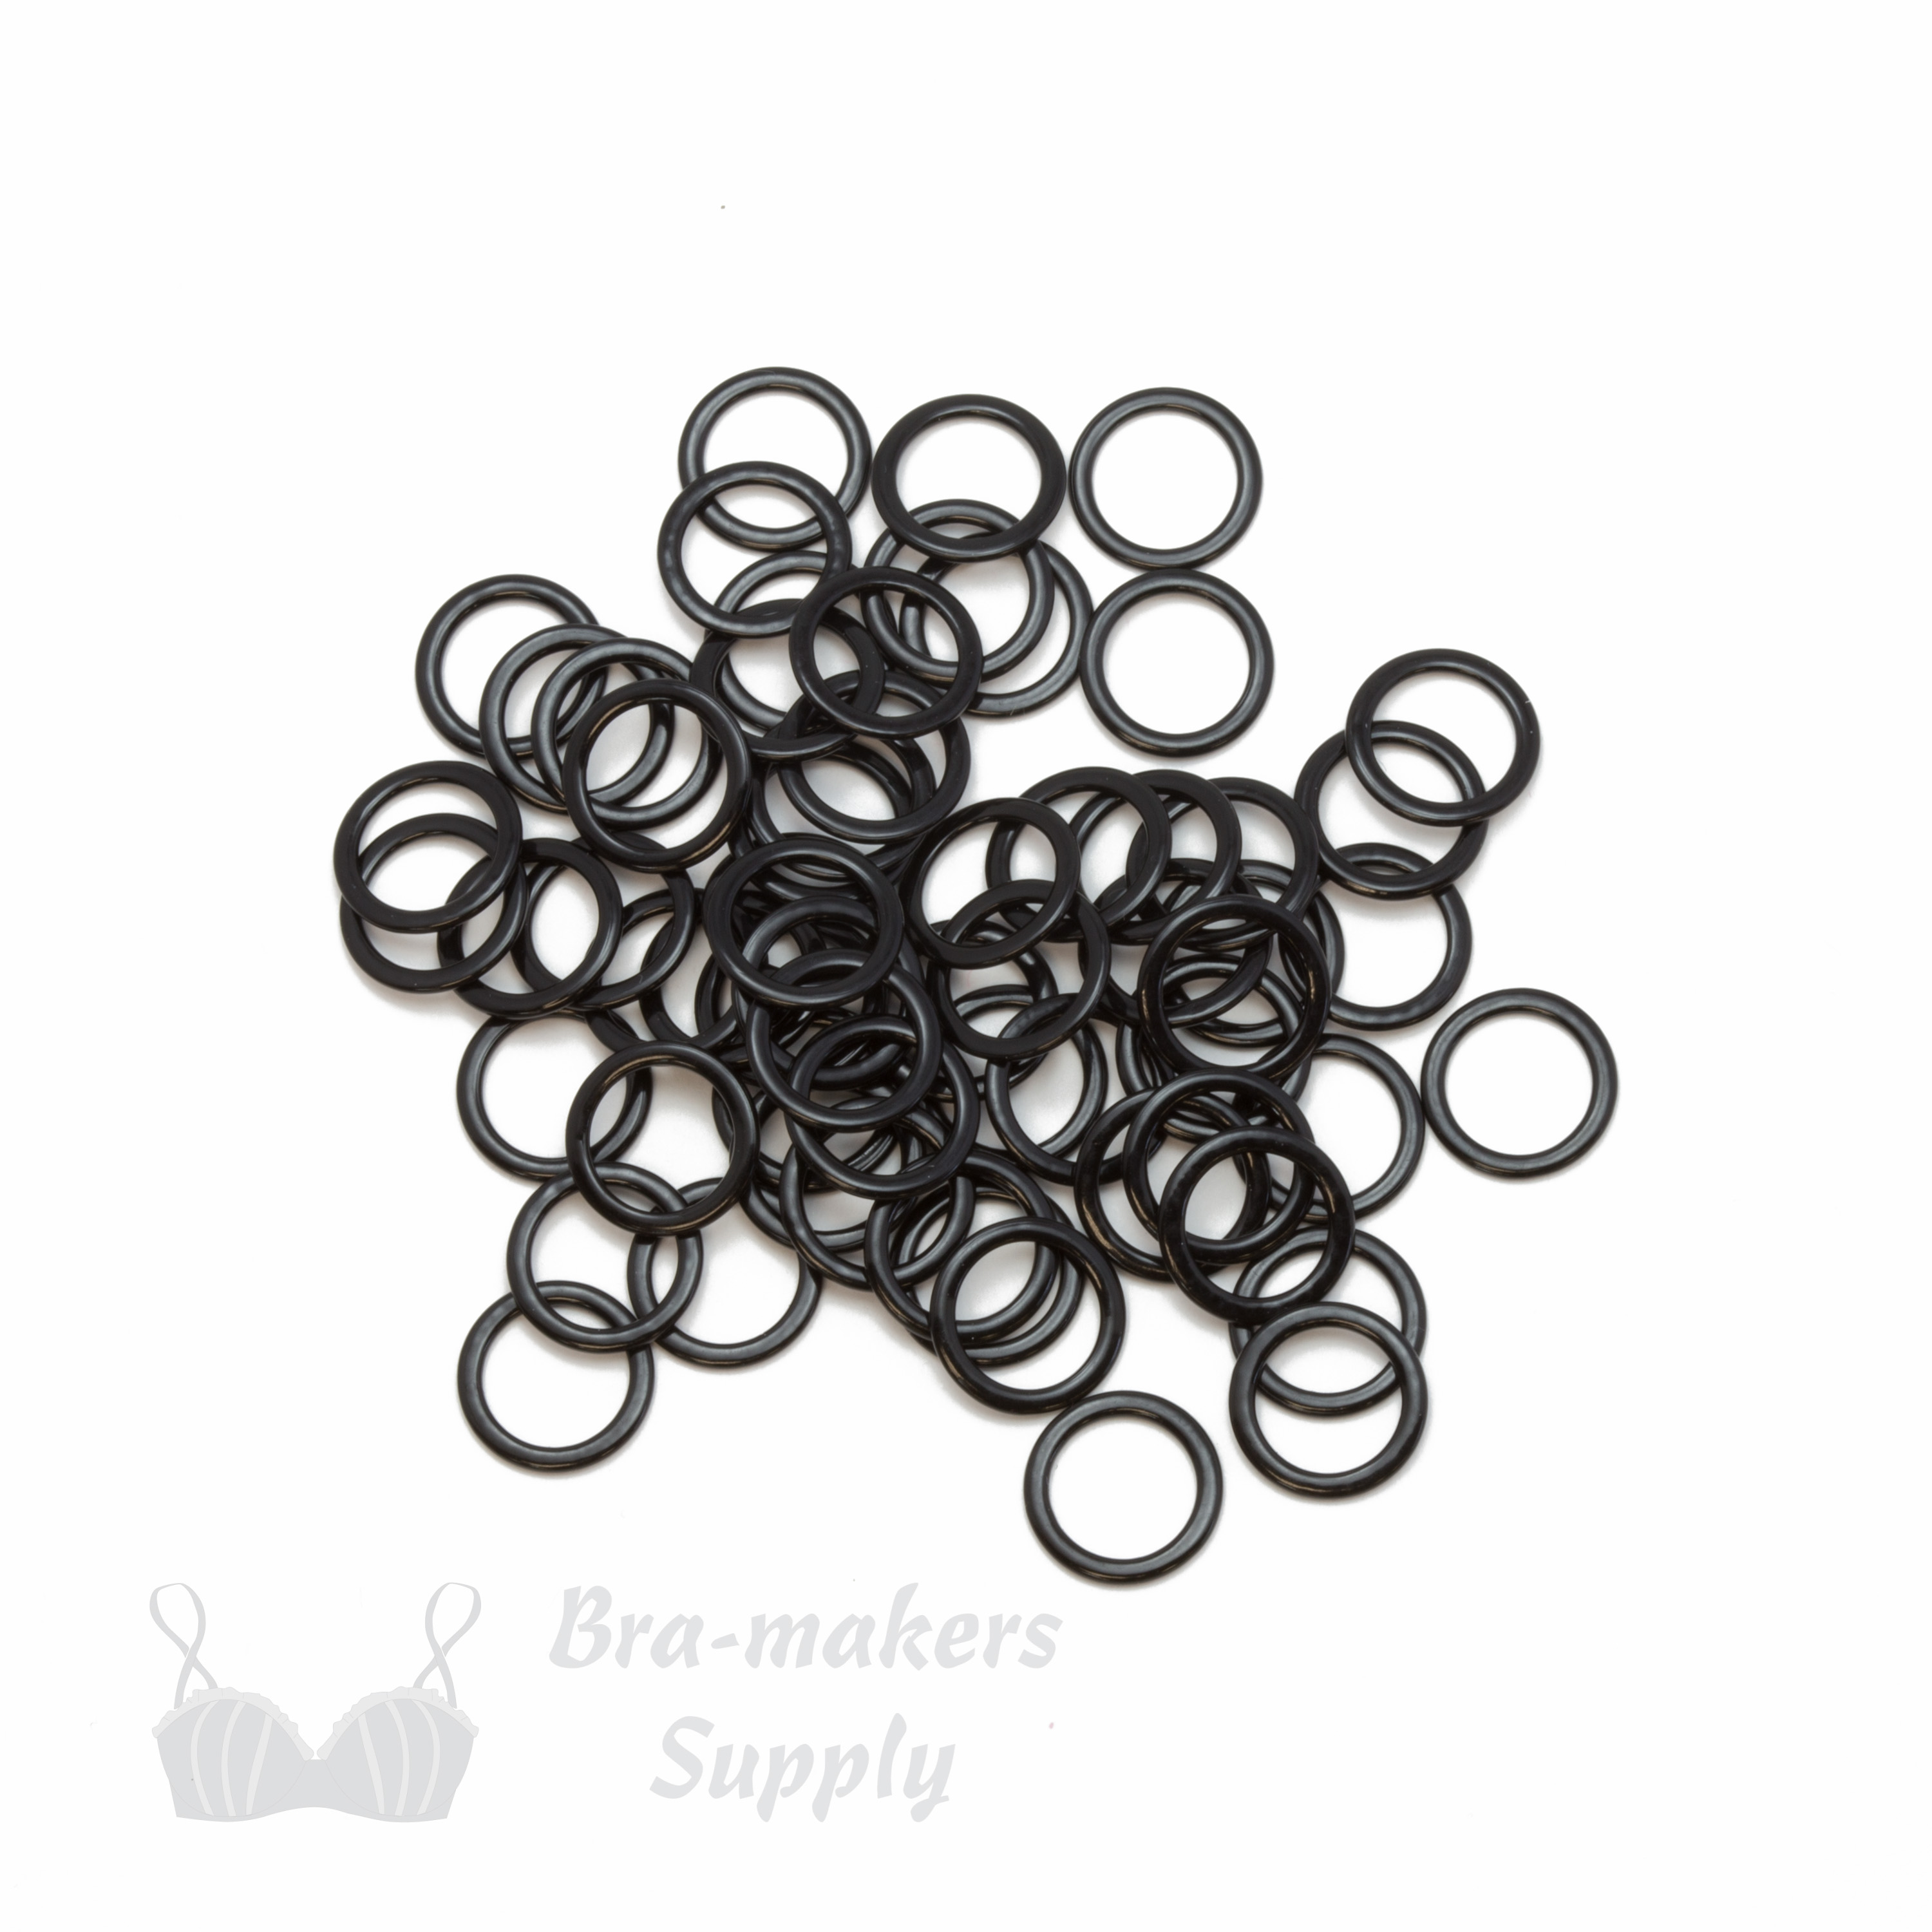 half inch 12mm rm-400 r black nylon coated metal rings sliders or anthracite Pantone 19-4007 from Bra-Makers Supply 100 rings shown